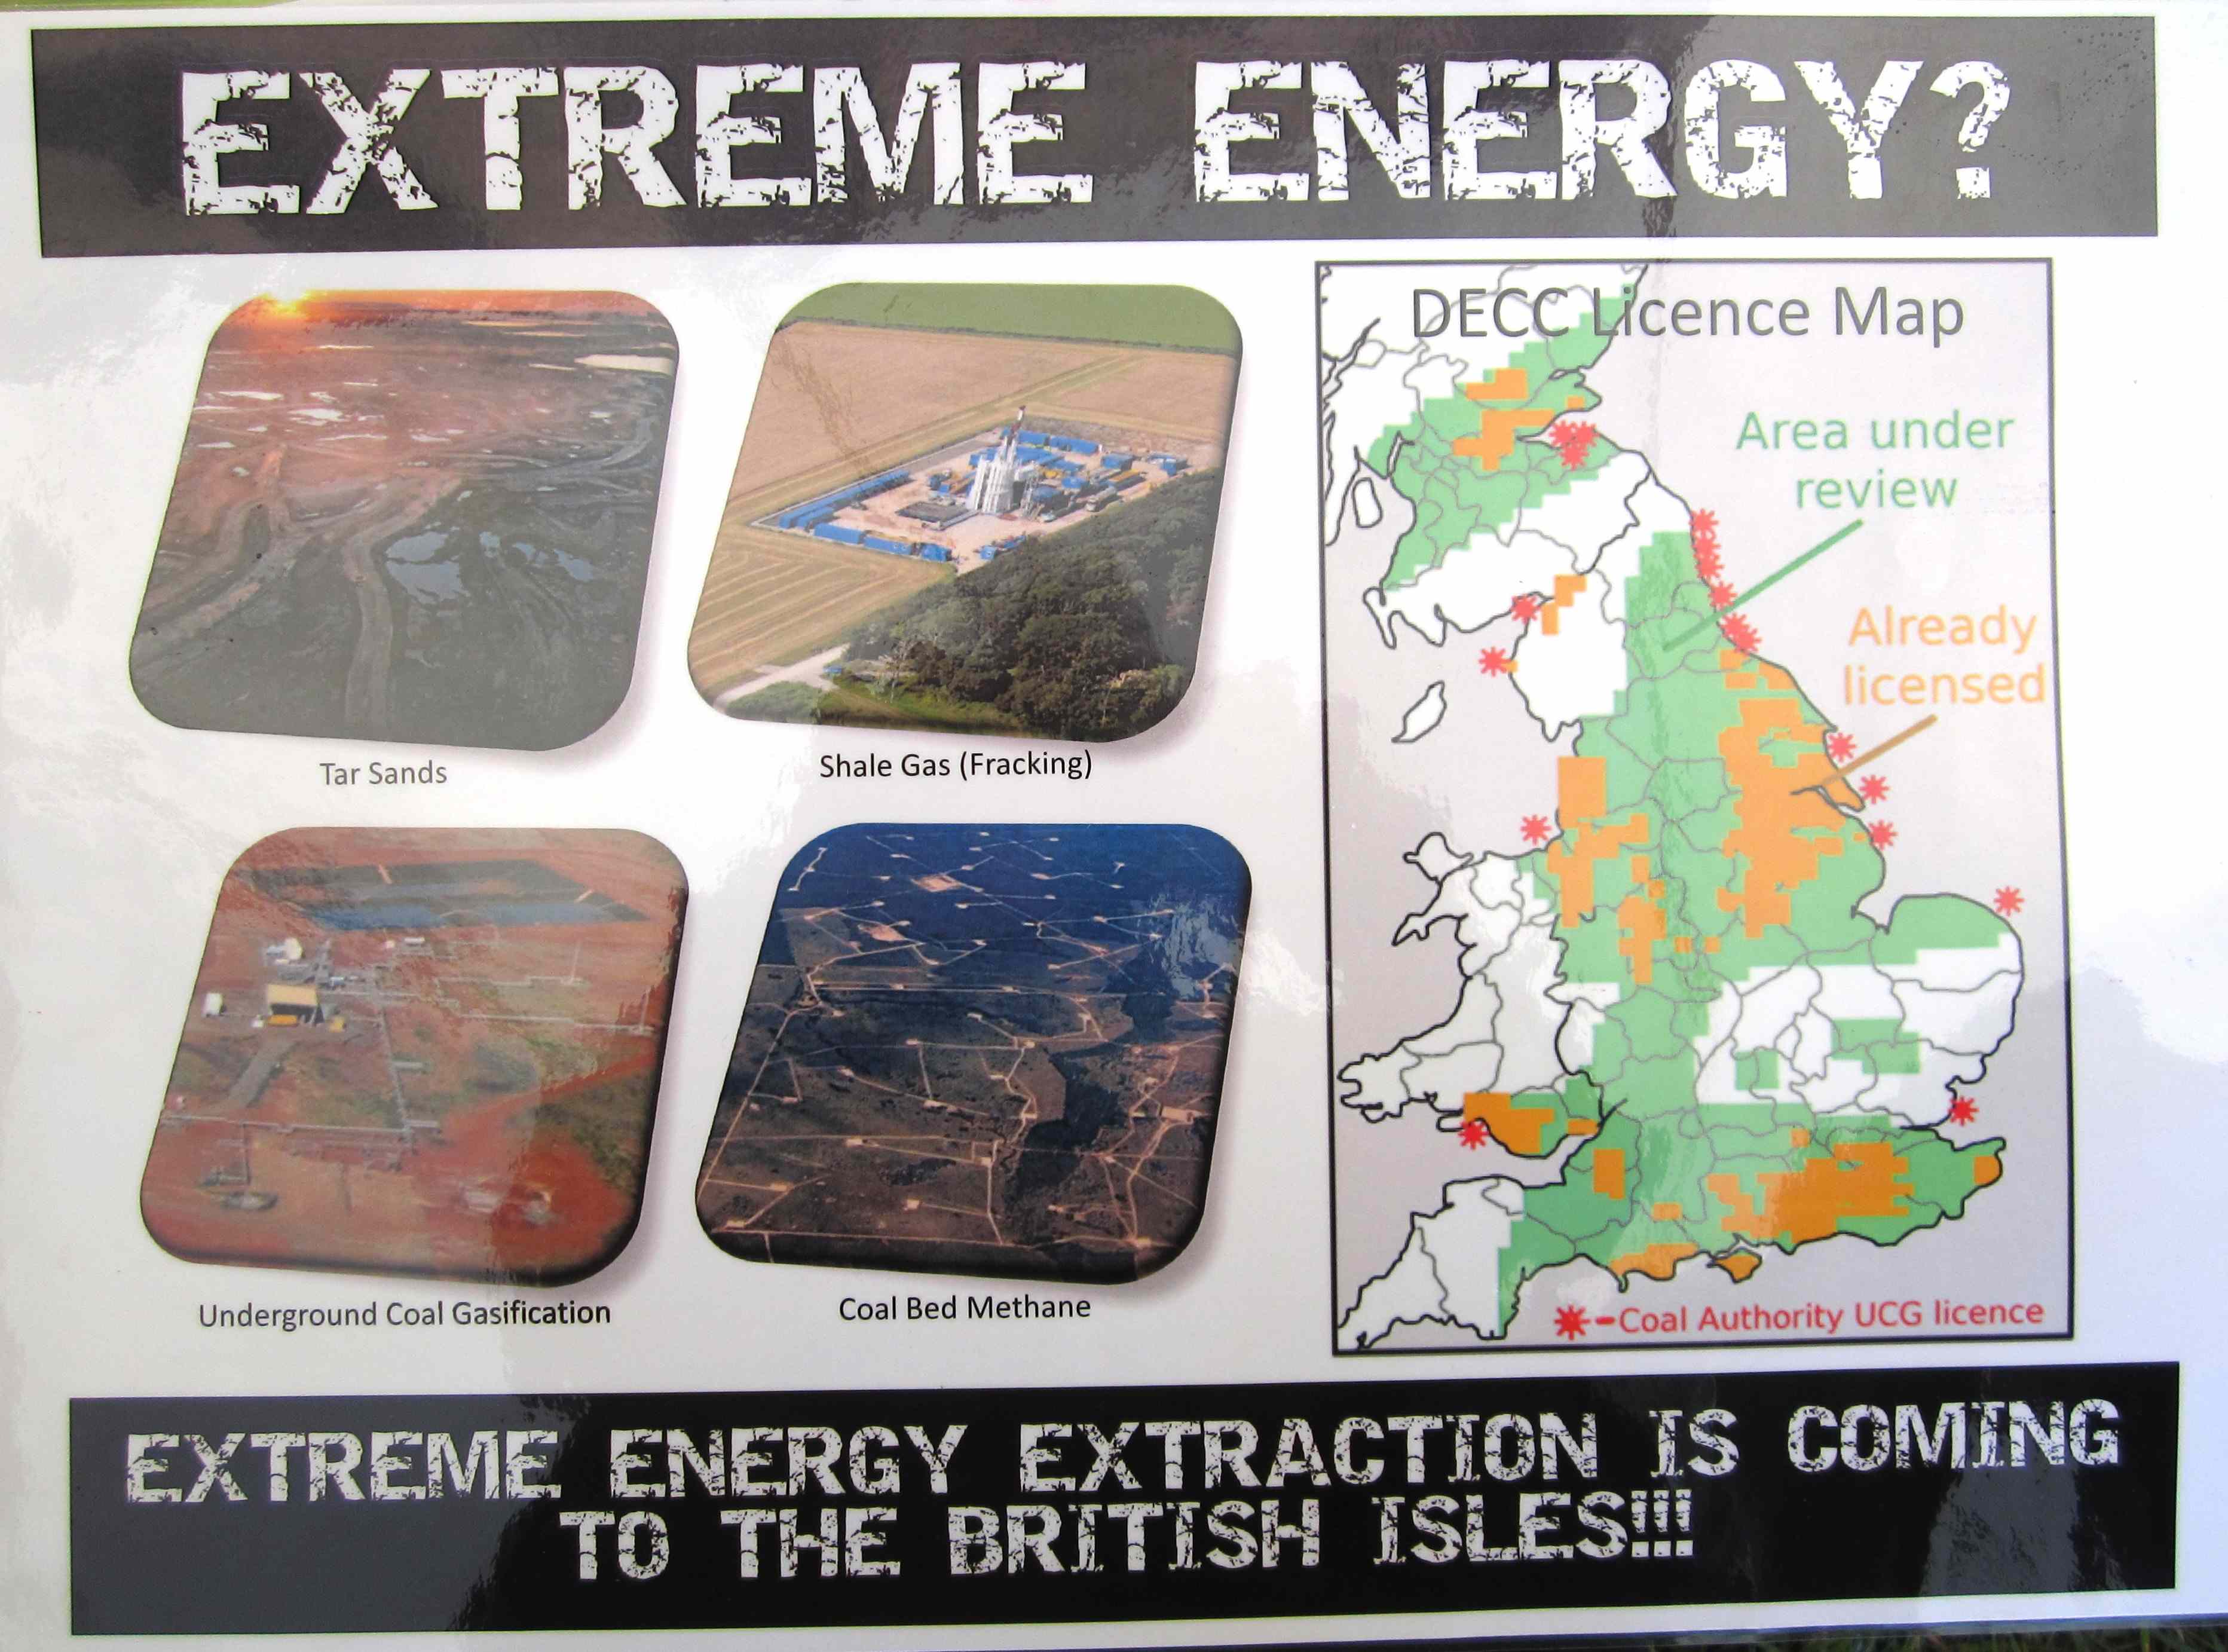 EXTREME ENERGY? DECC Licence Map & 4 types of EE